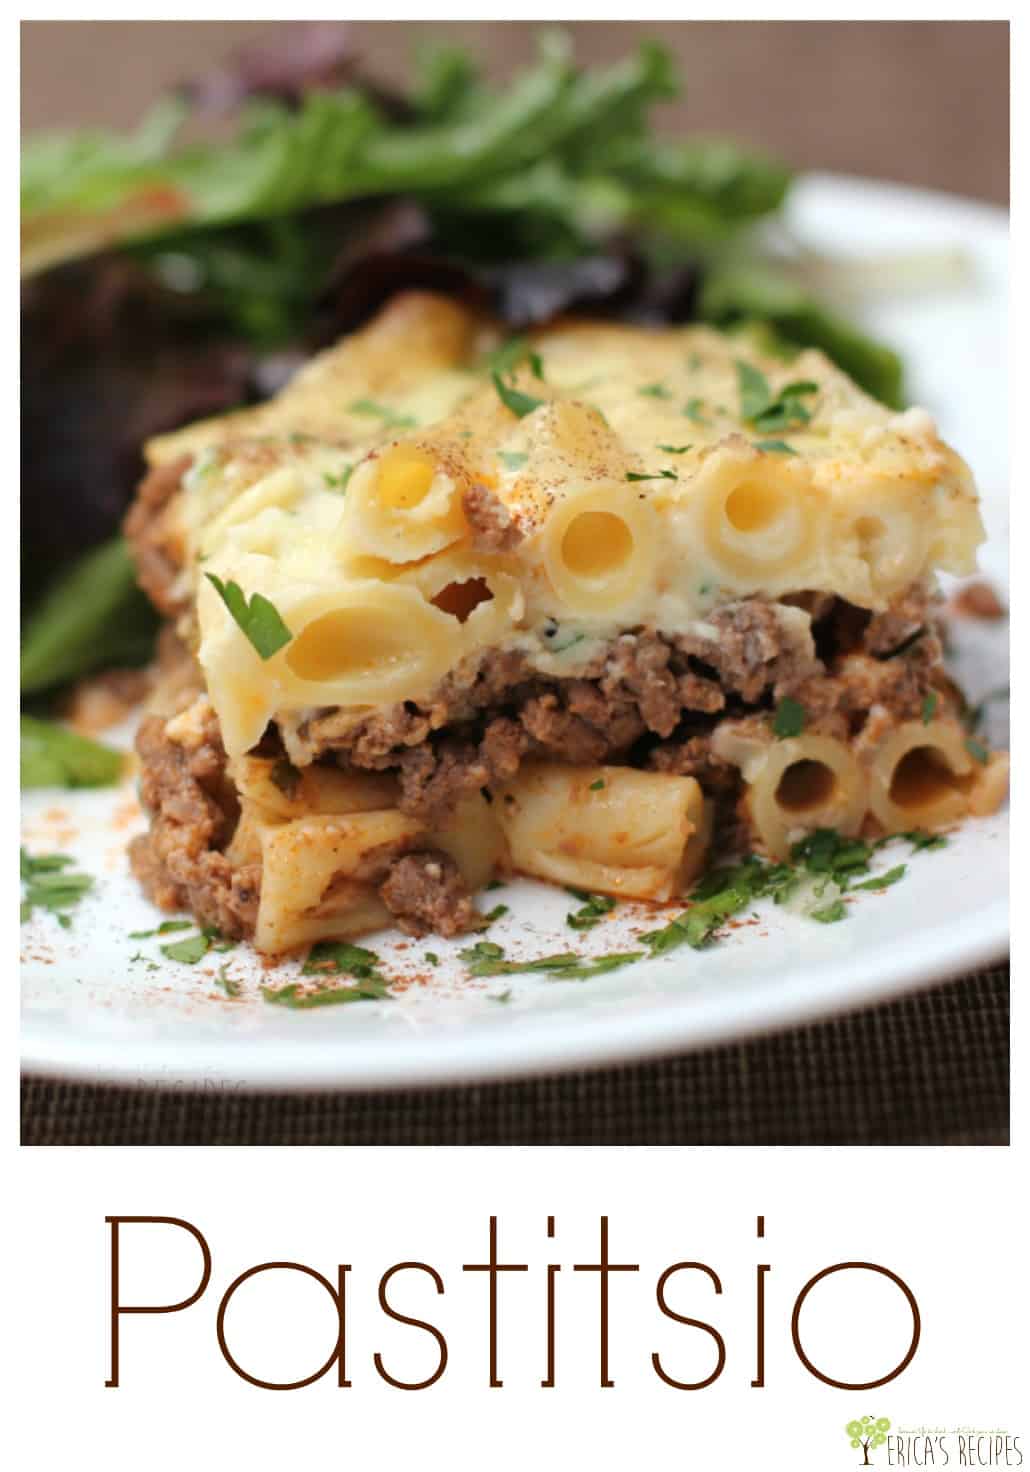 Get ready to dirty some pans, we're making Pastitsio! A Greek food, baked pasta, ground beef casserole, this cozy recipe is comprised of gorgeous layers baked to a creamy, egg-y awesomeness. #greekfood #food #recipe #cozycasserole #comfortfood #cheese #groundbeef #familydinner #casserole